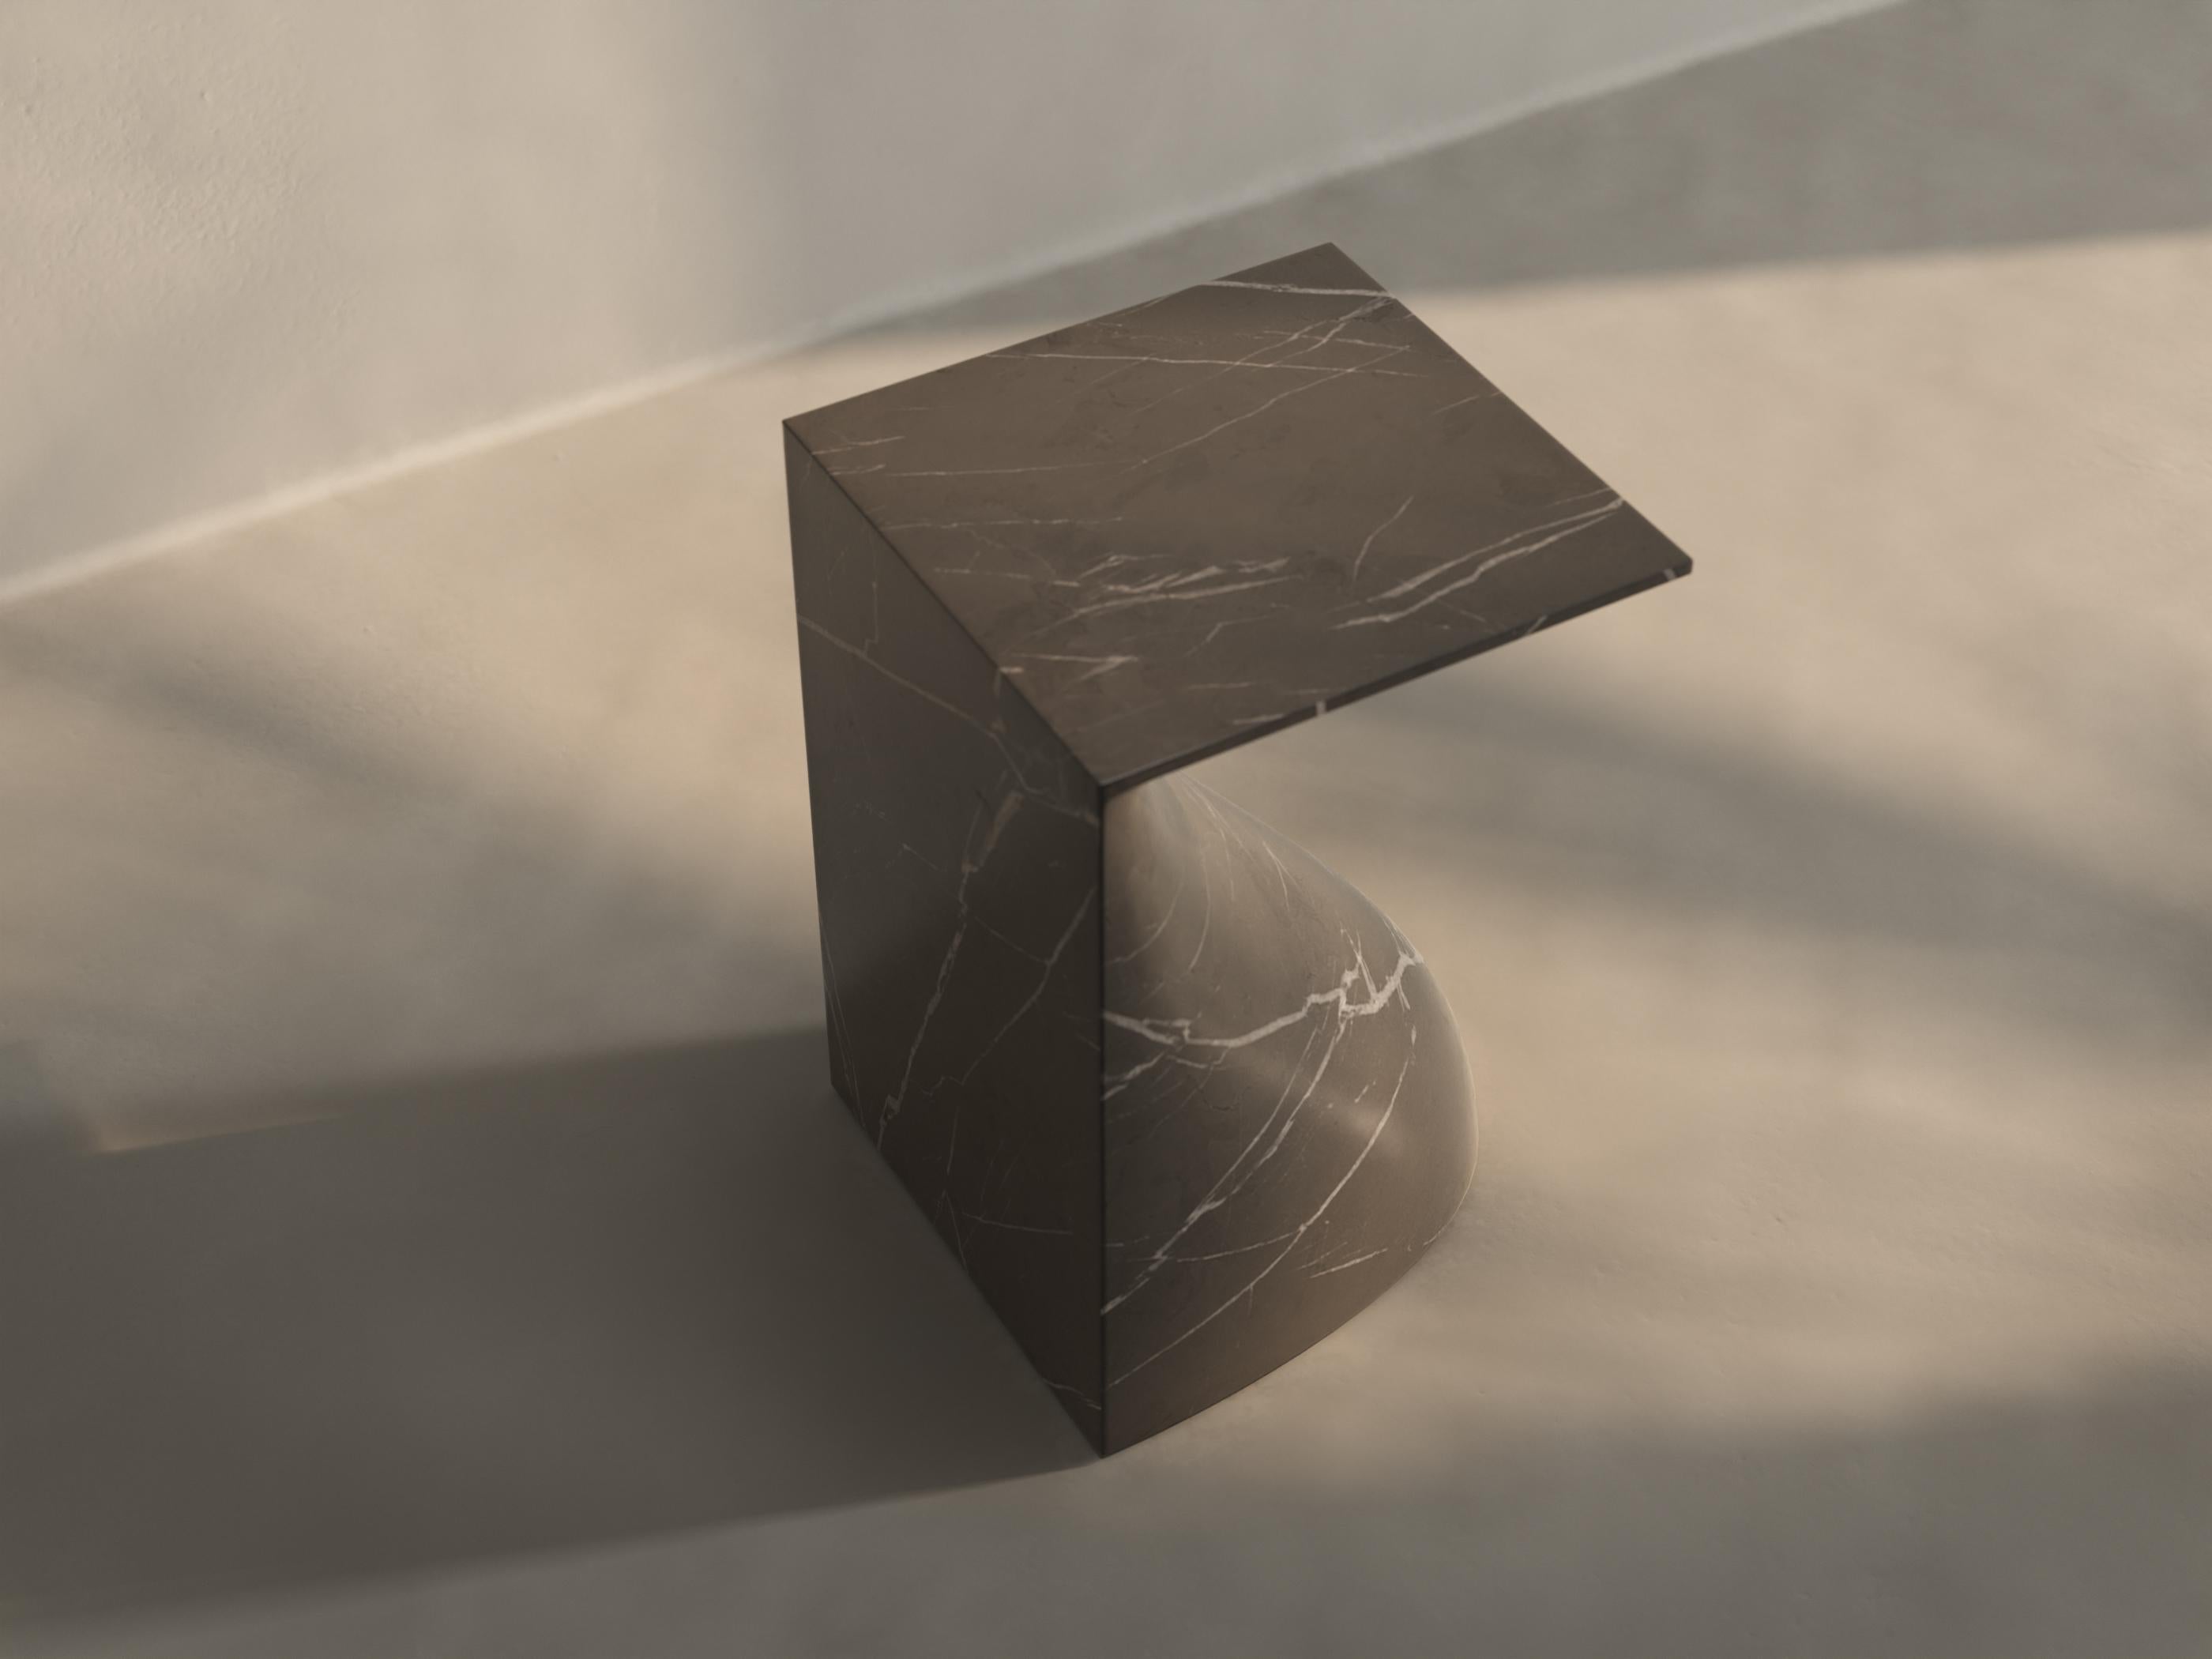 Ula sculpture pull up table by Veronica Mar
Dimensions: D40 x W40 x H60 cm.
Materials: Marble.
Weight: 90 kg.
Numbered and limited edition.

Ula sculpture Pull up table can be a bespoke piece. Custom Dimensions and type of marble Available